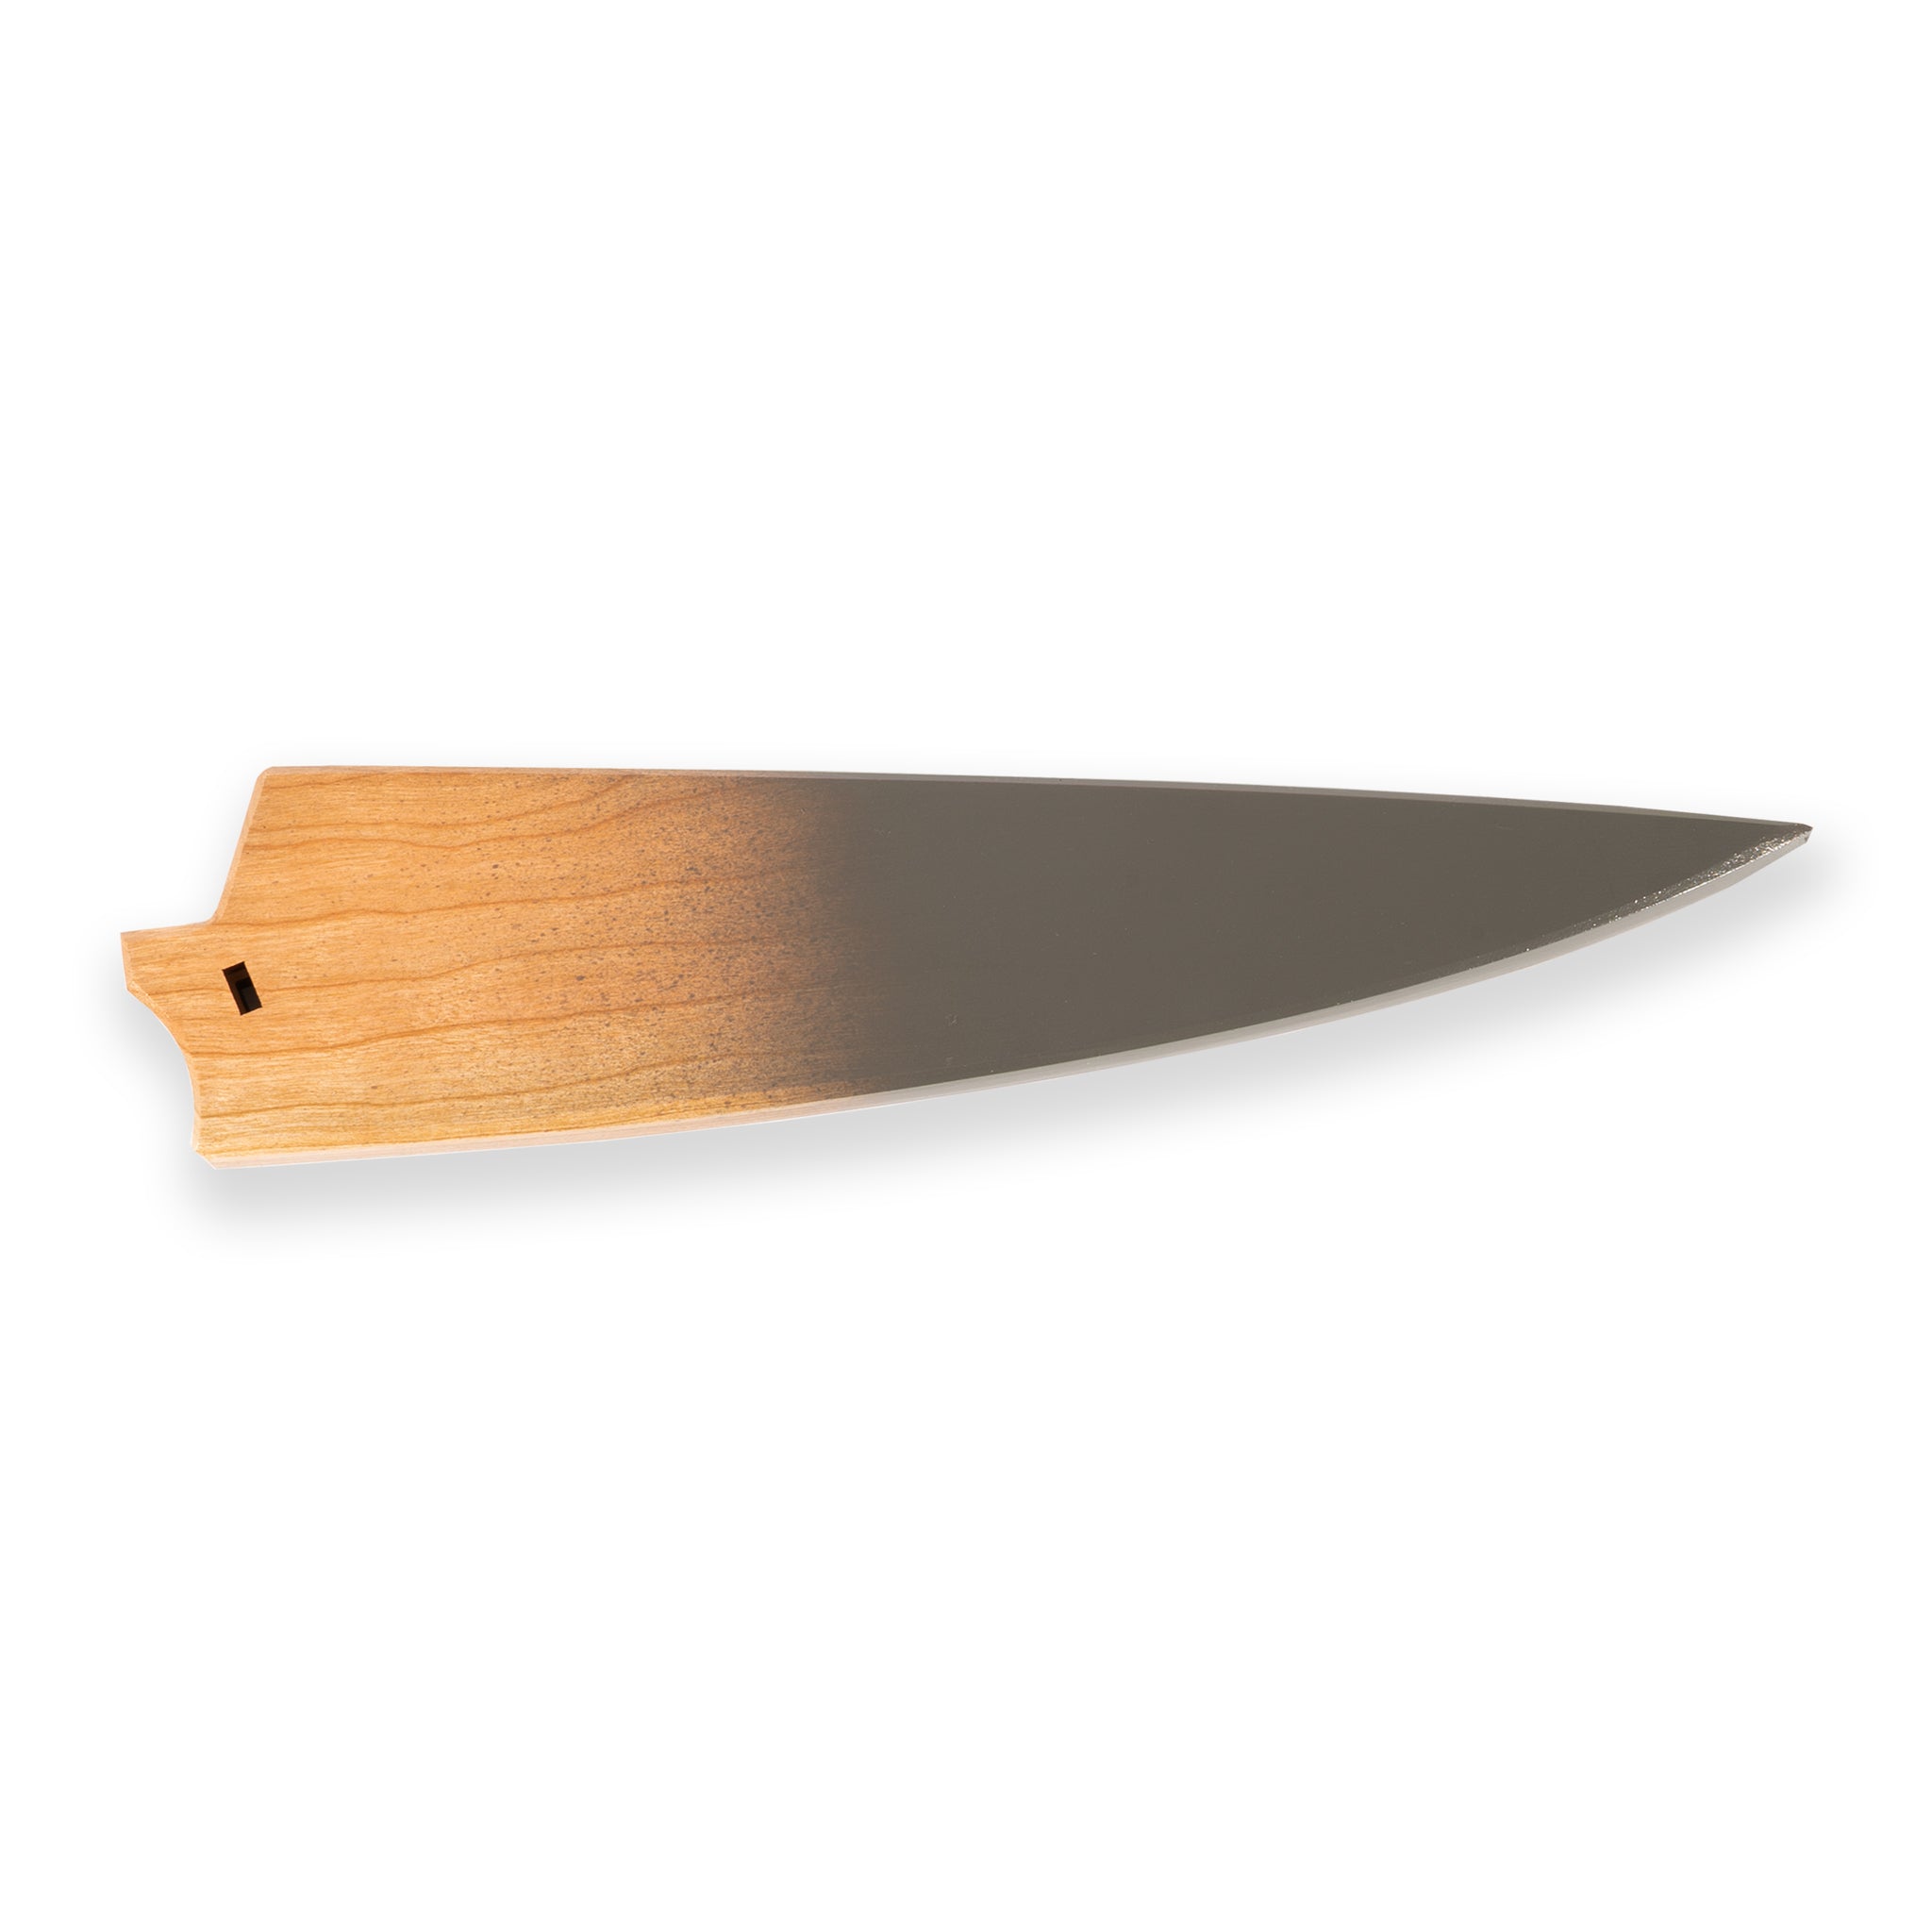 eXo Blue 8.5" chef saya knife cover cherrywood with grey detail.